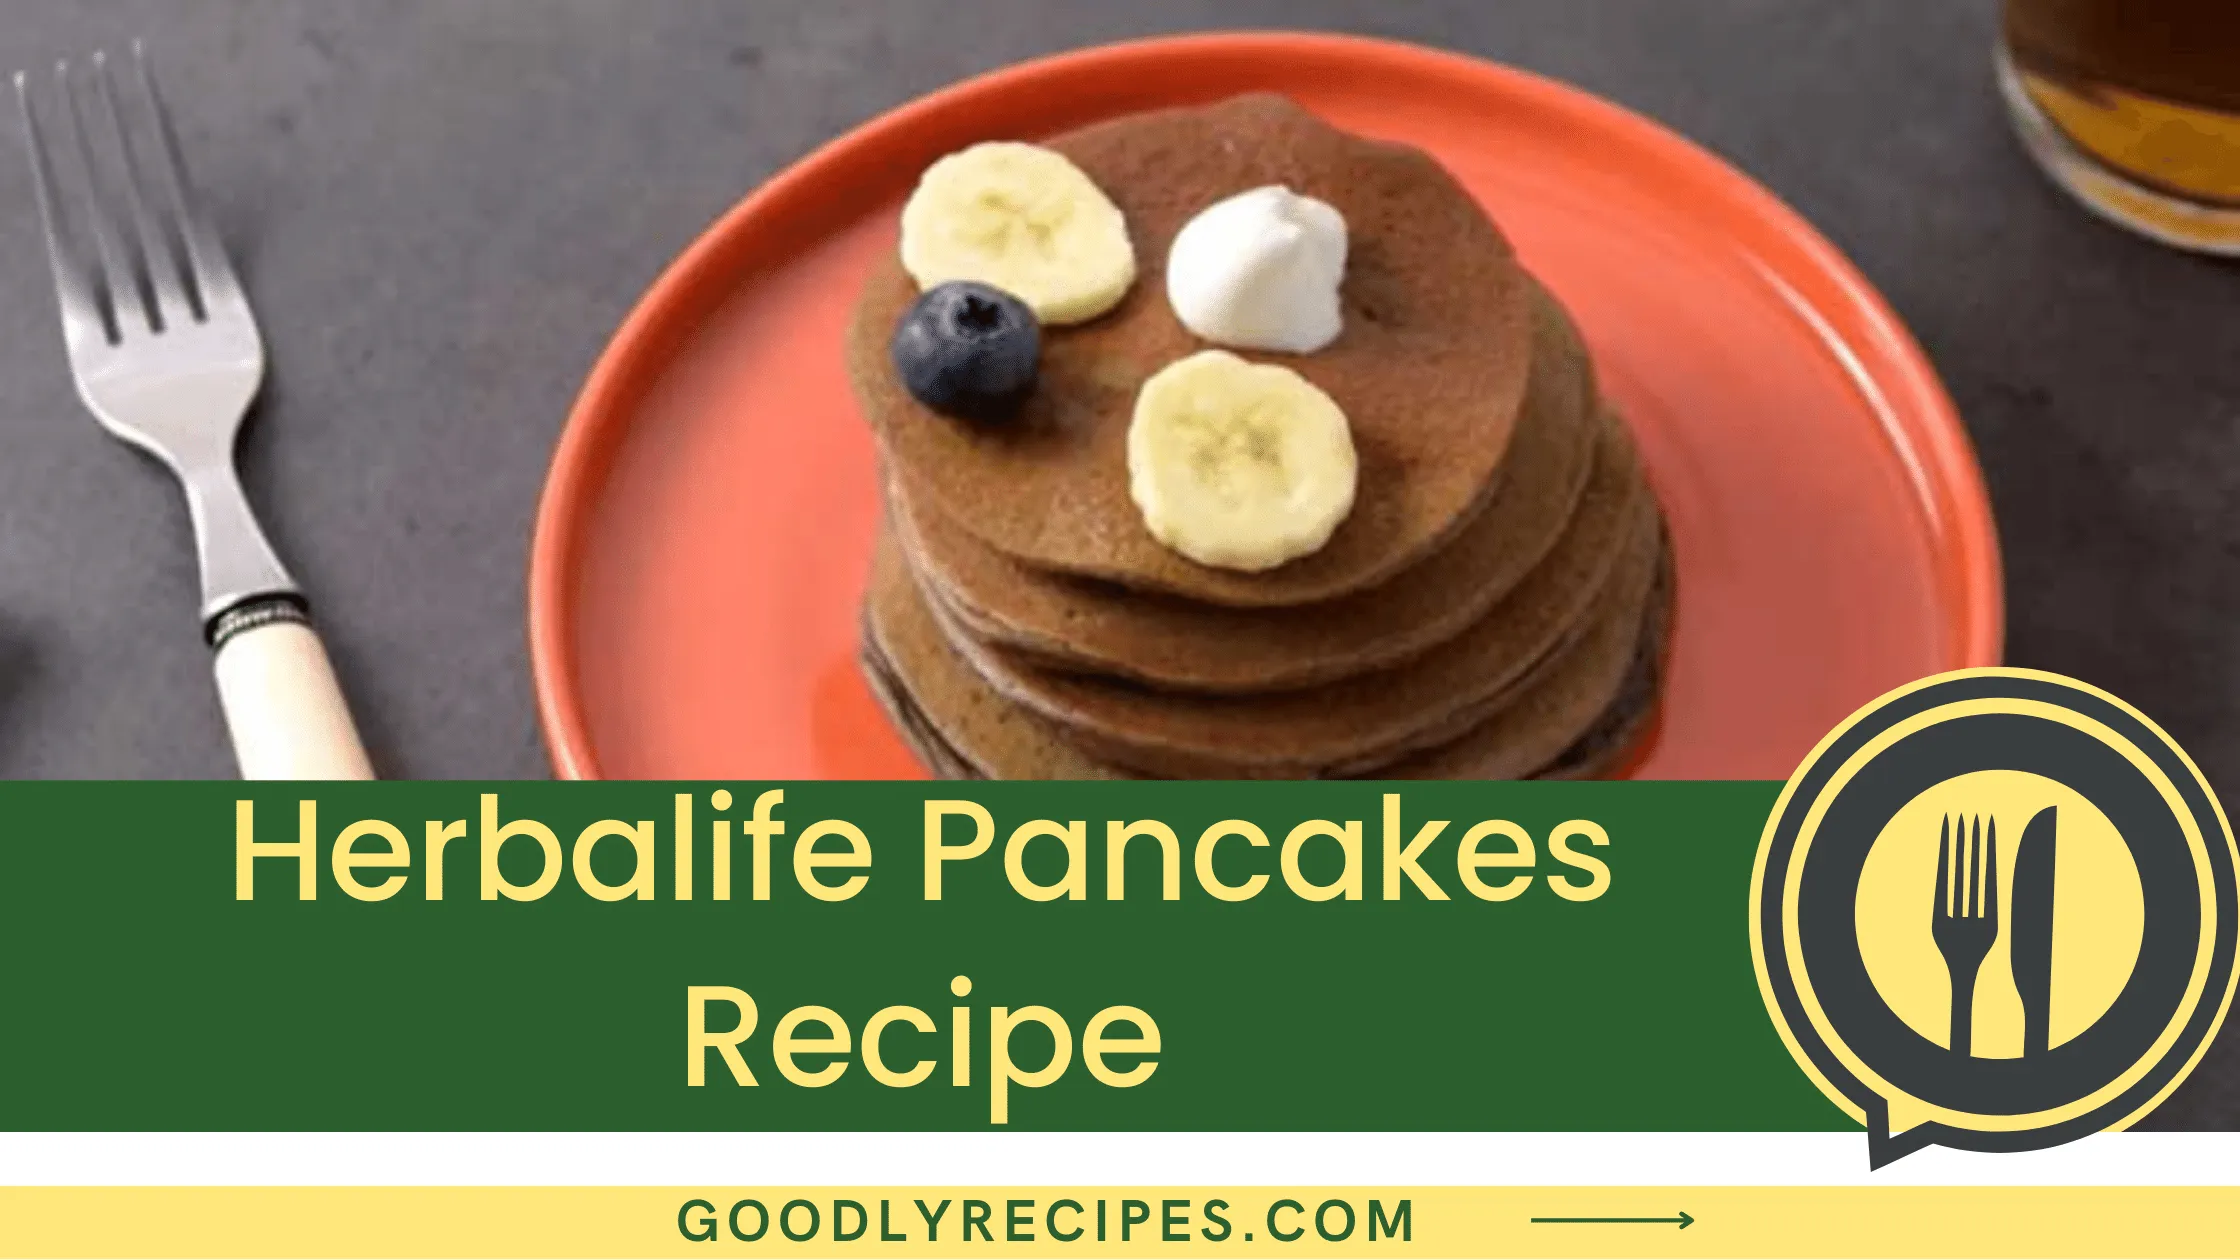 What are Herbalife Pancakes?